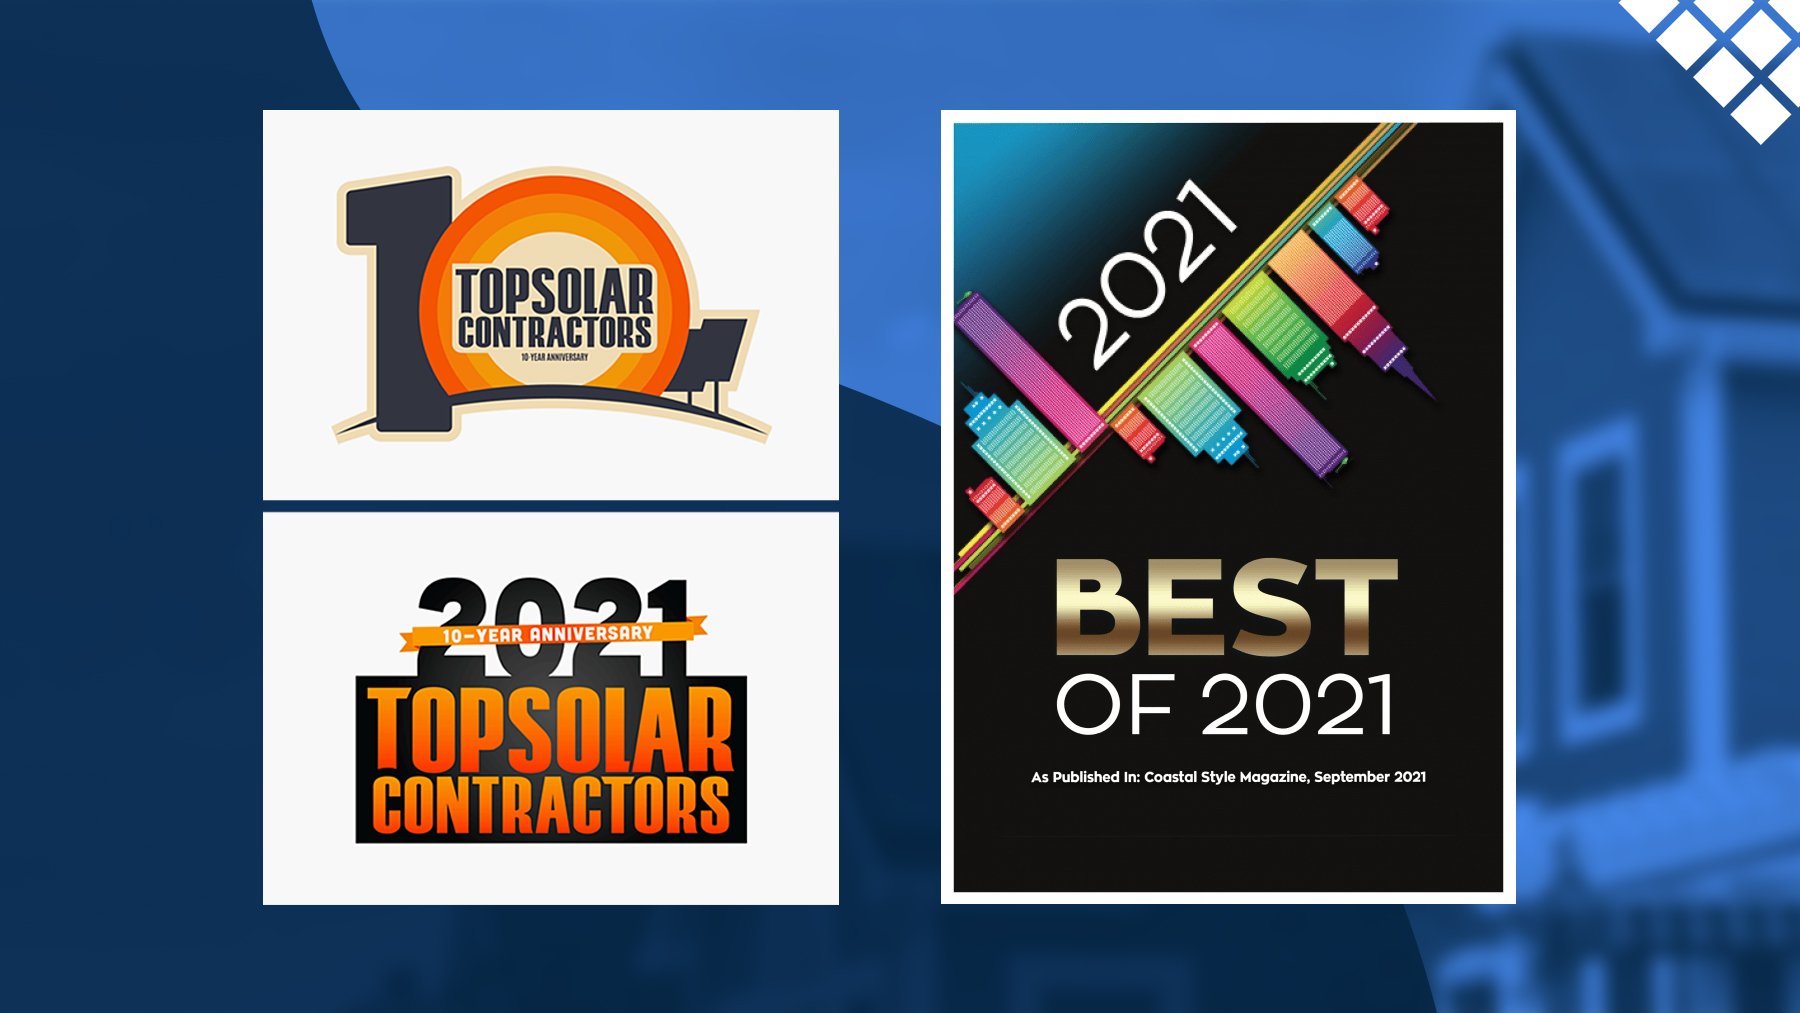 2021 BEST of 2021 award and top solar contractors for 2021 on top of blurred image